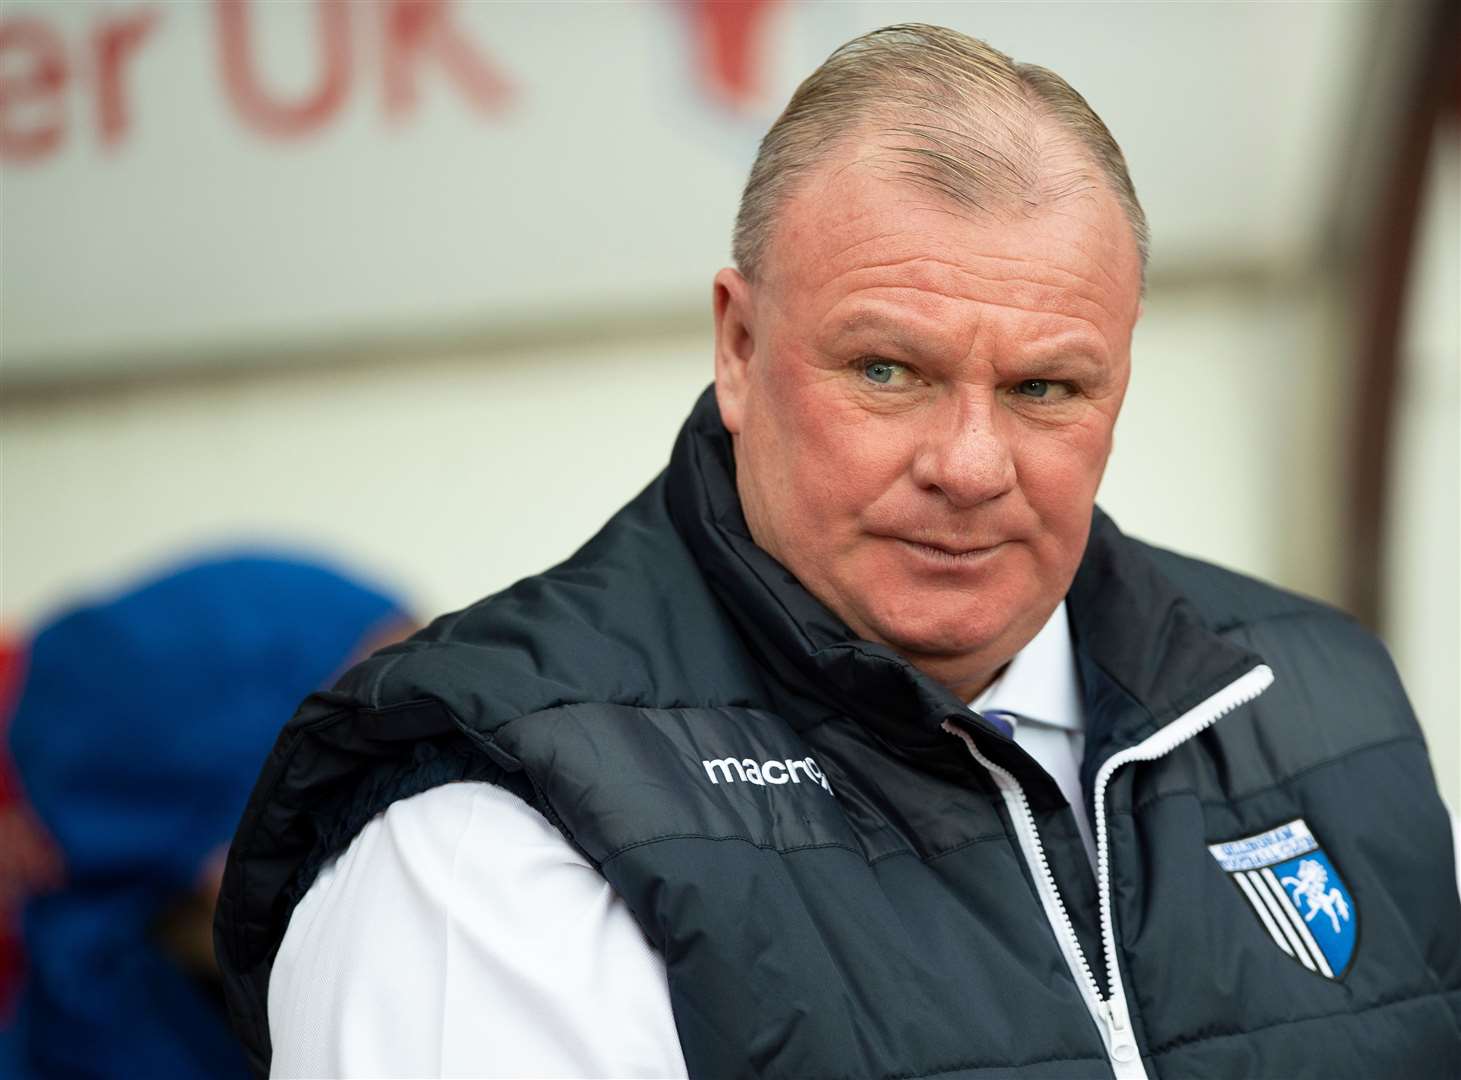 Gillingham manager Steve Evans says his family have made a donation to the NHS